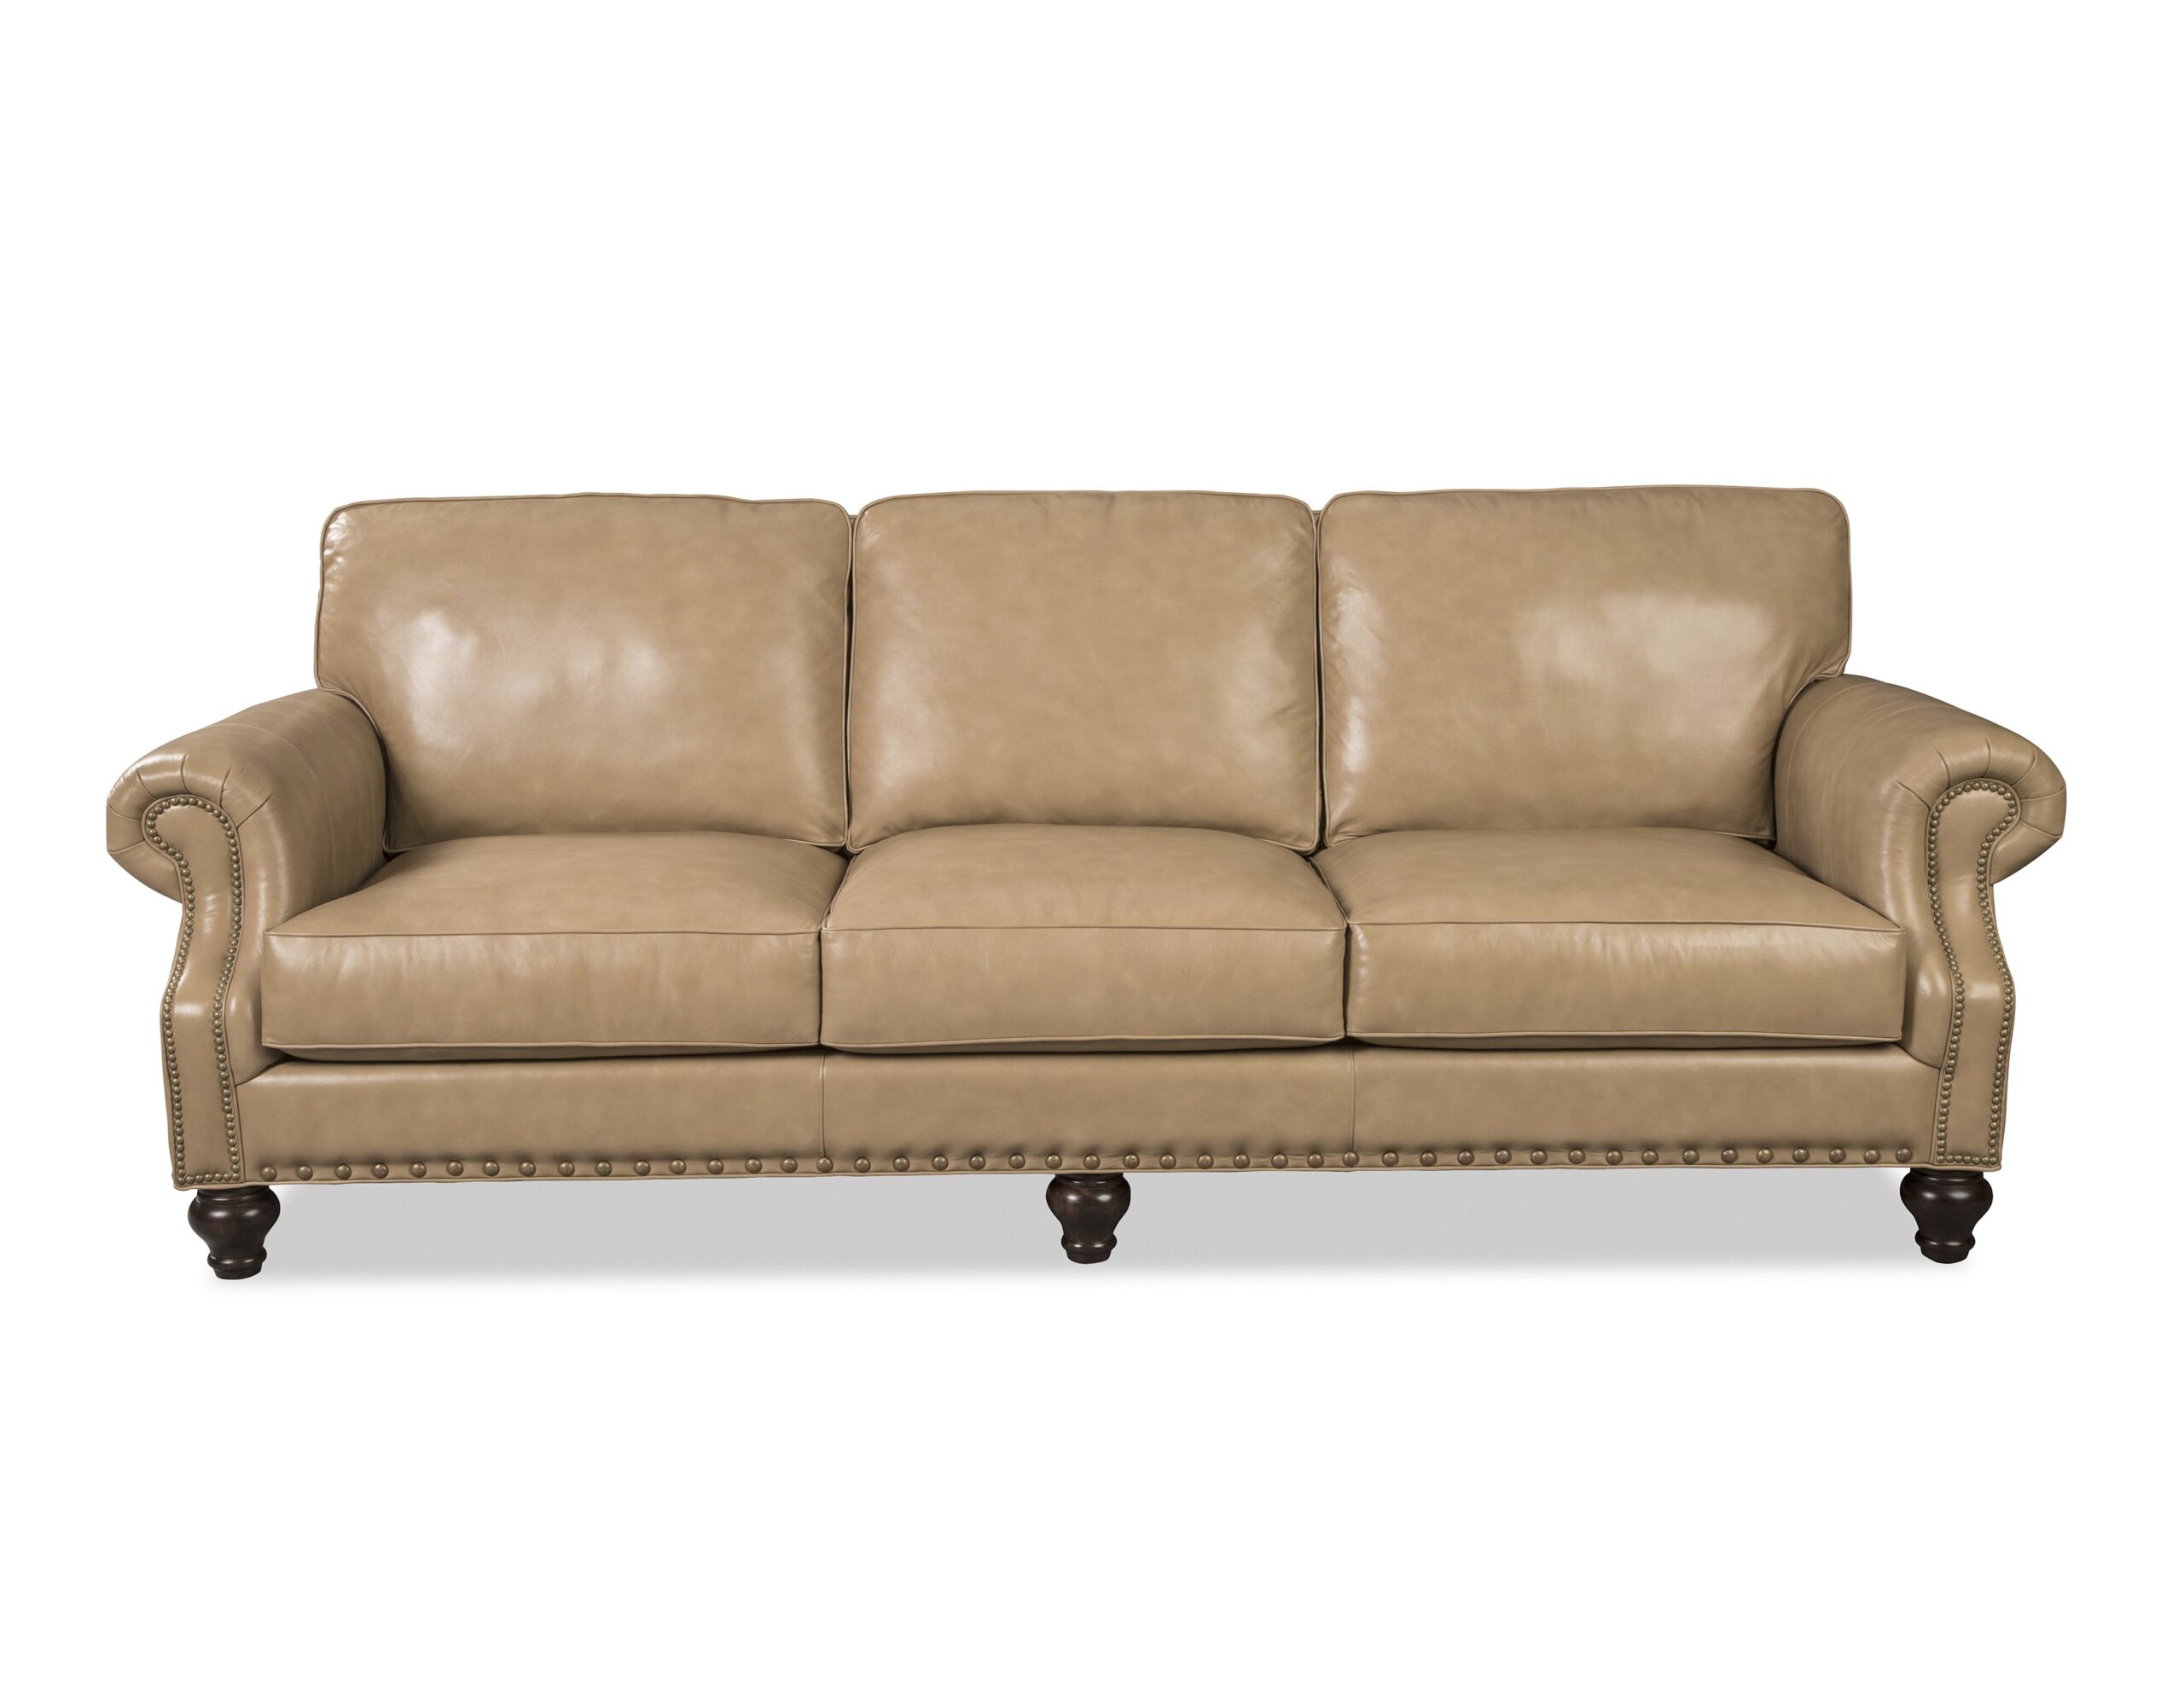 craftmaster leather sofa prices